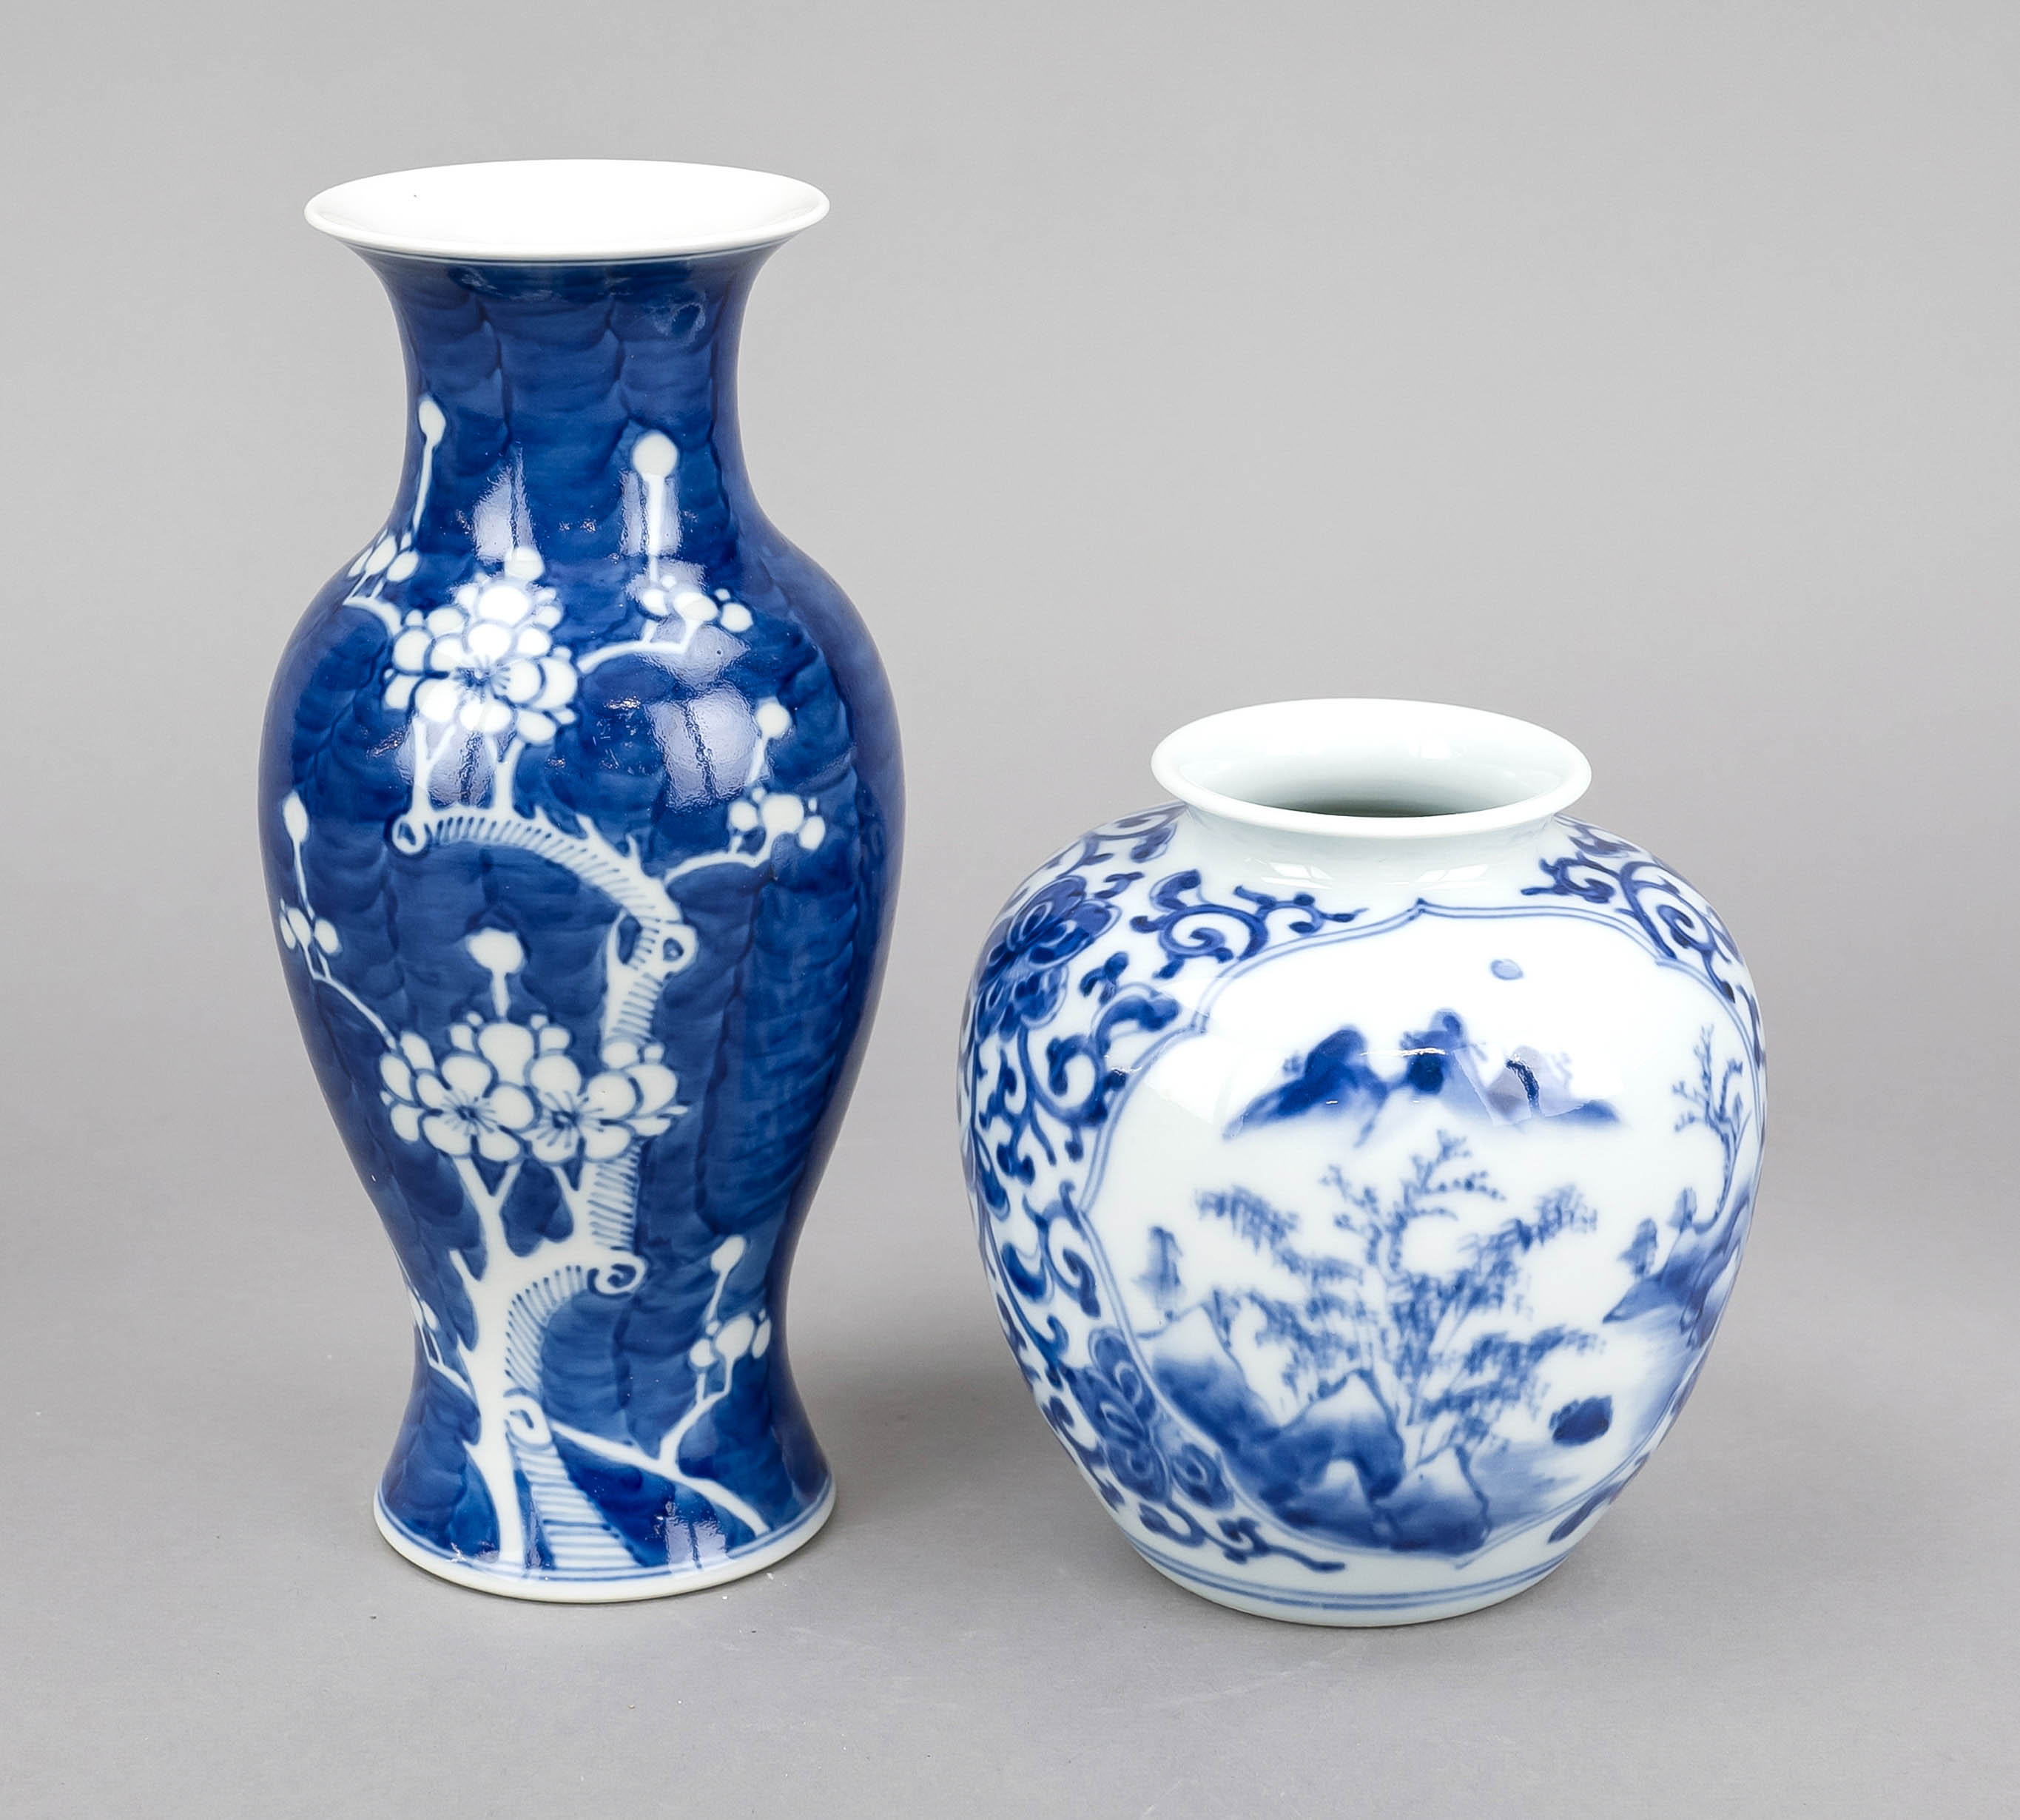 2 vases, China, 19th/20th century, 1 small prunus vase with surrounding cobalt blue decoration, a